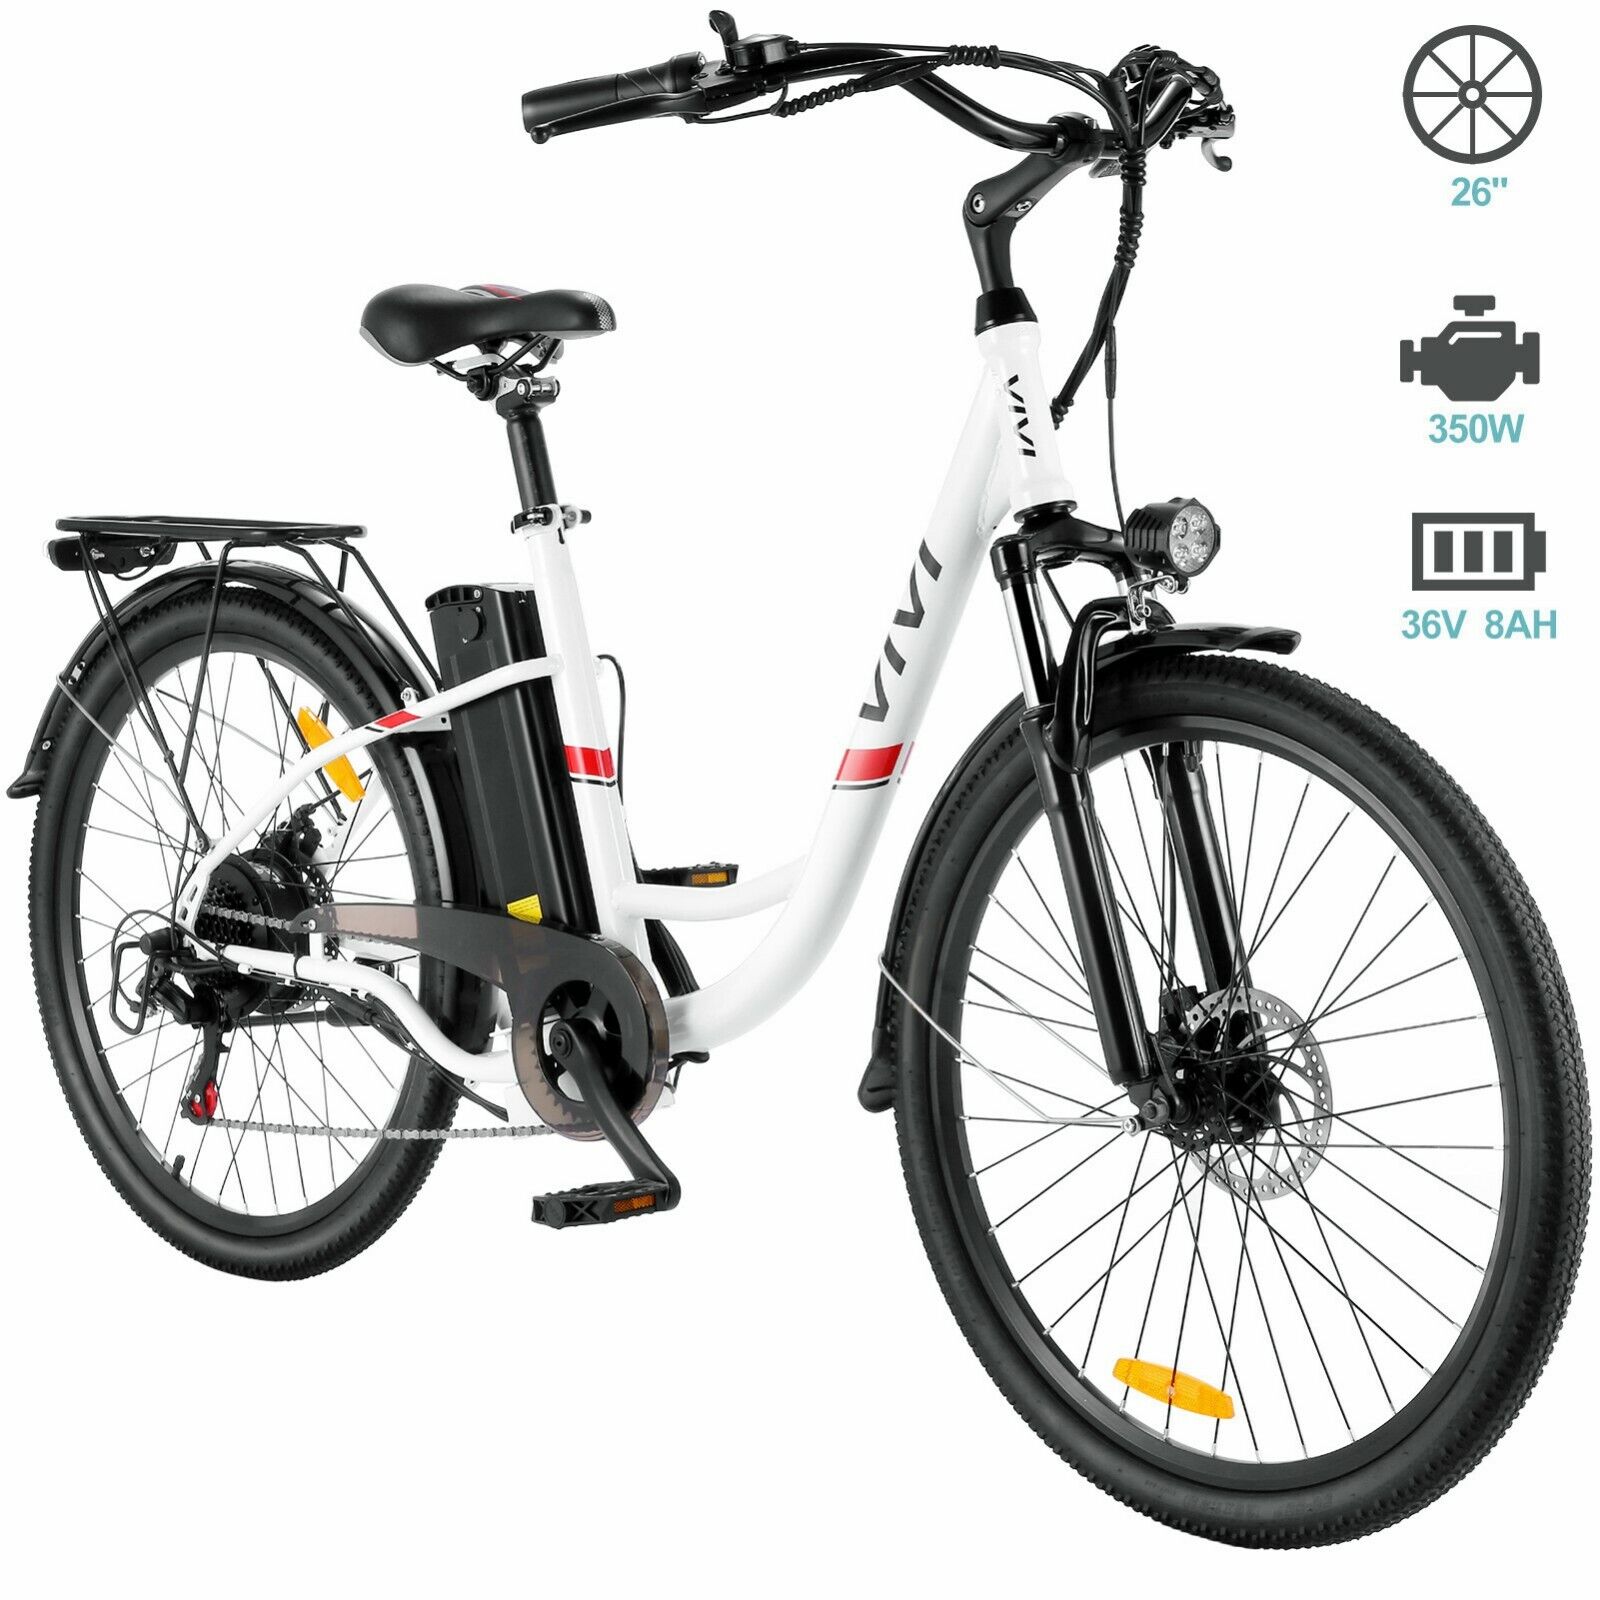 Electric Bicycle for Sale: 26" Electric Bike 36V 350WElectric Bicycle e-Bike 7 speed Removable Battery 2022 in Hacienda Heights, California